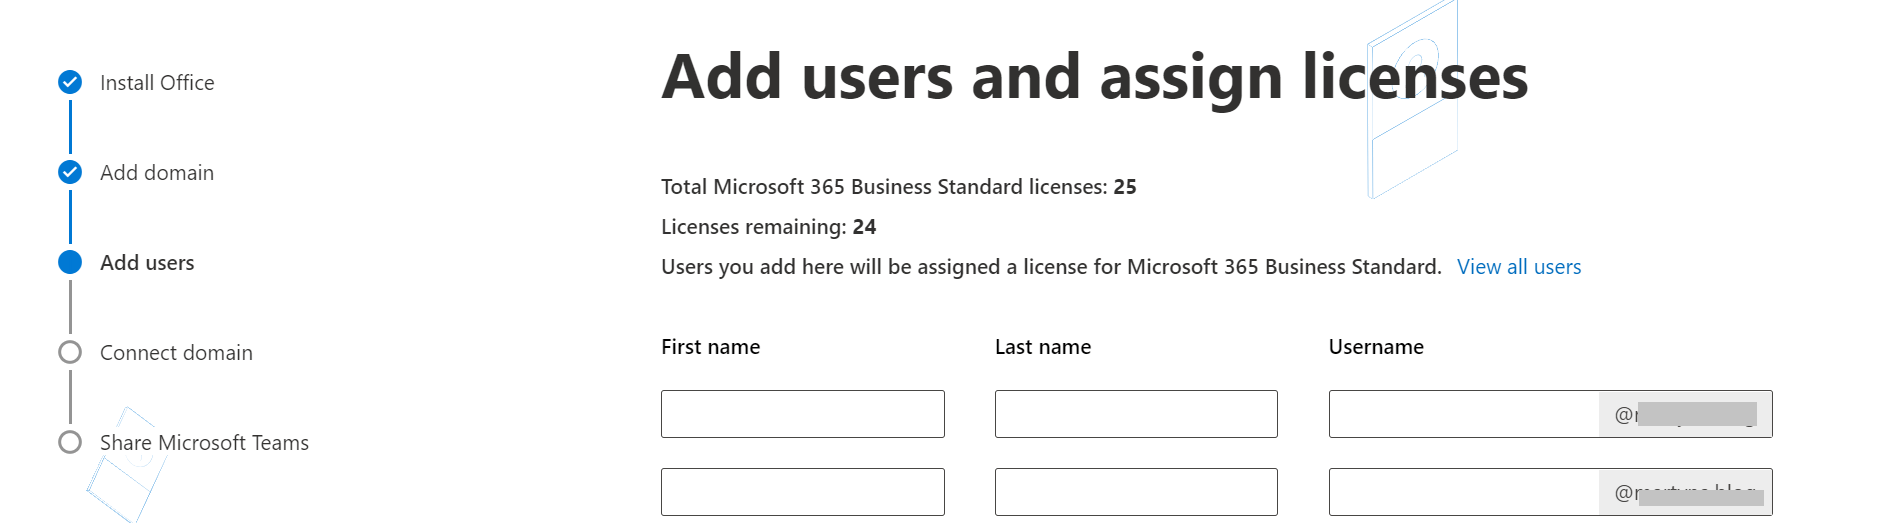 How to Set Up a Custom Email Address With Office 365